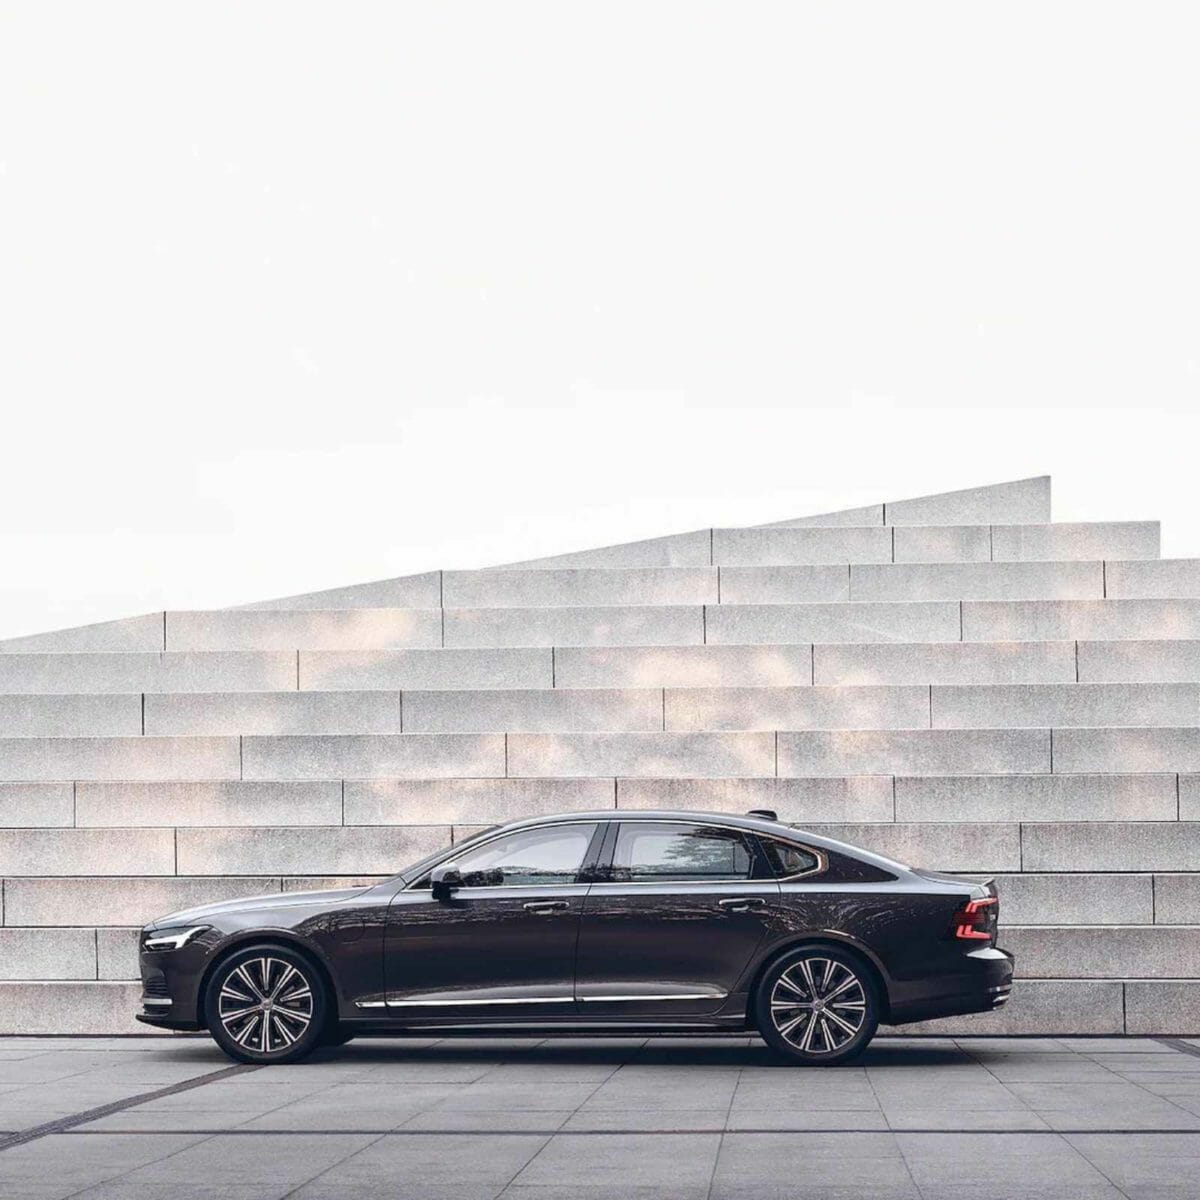 Volvo s90 facelift launched